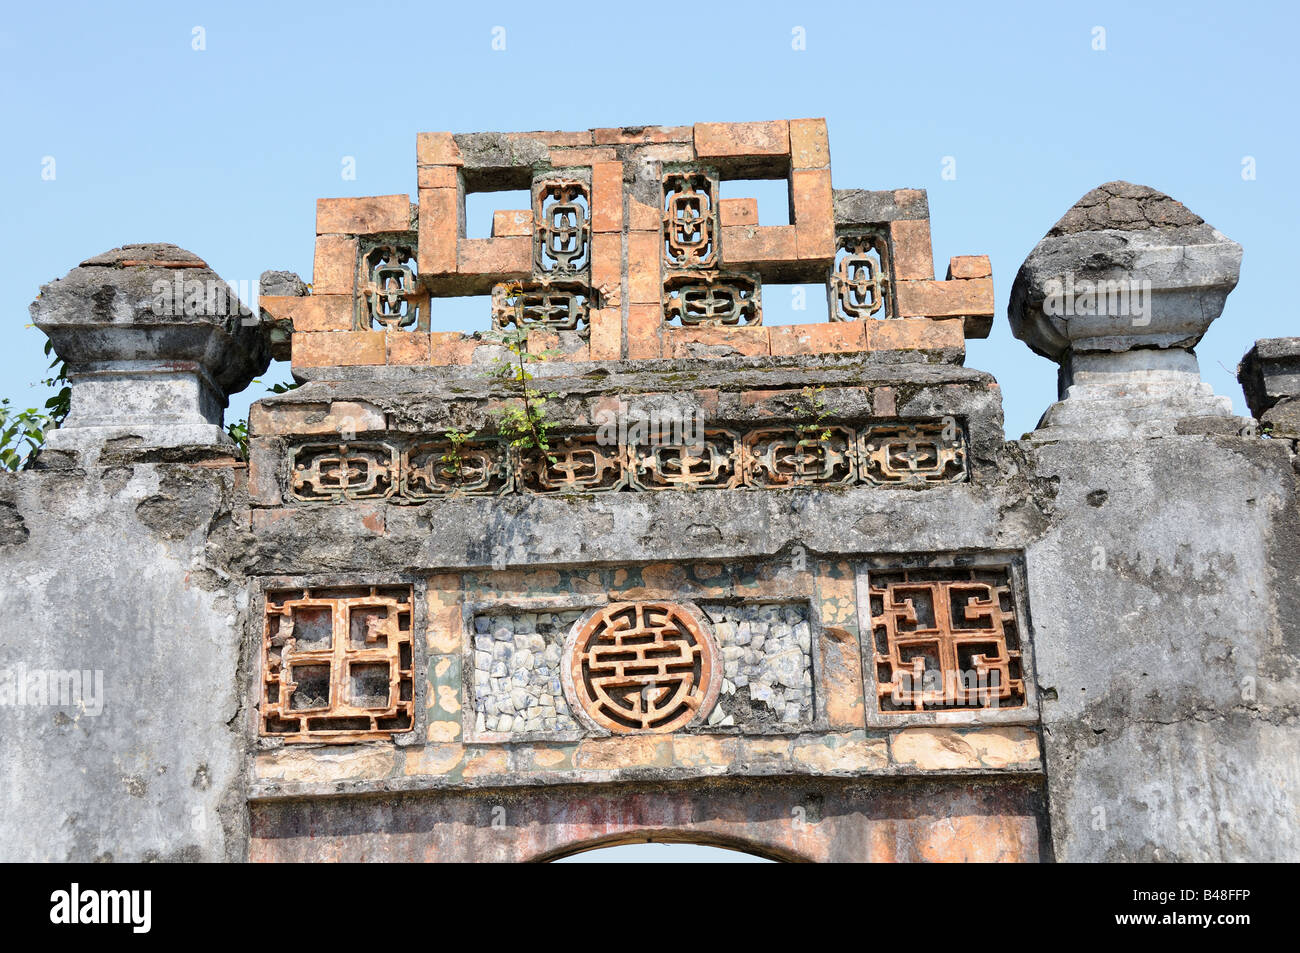 Buddhist symbols on a gate at The Imperial City Hue Vietnam Stock Photo